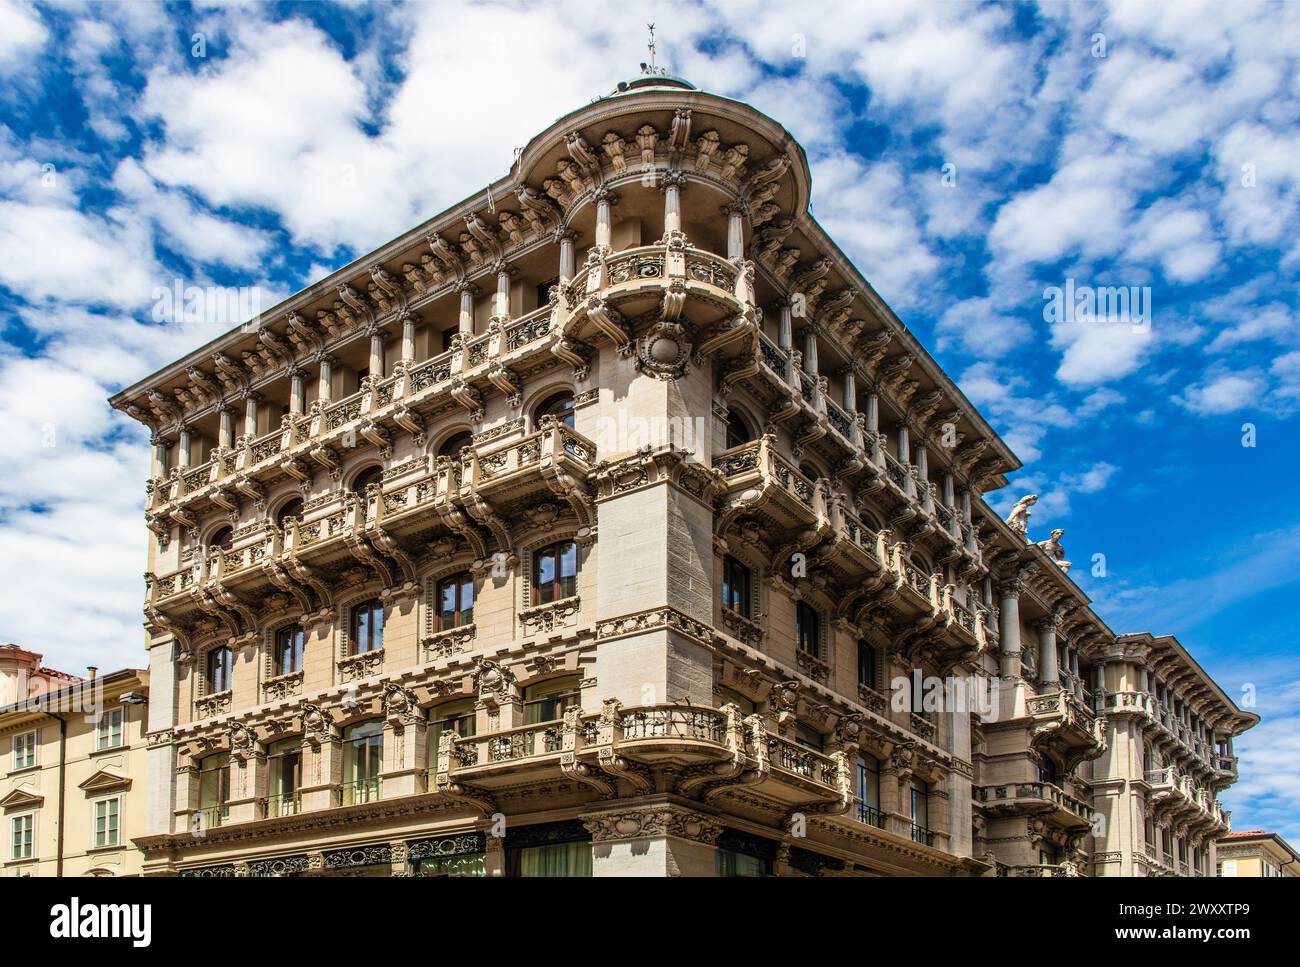 Casa Smolars, house facade in the old town, Trieste, harbour town on the Adriatic, Friuli, Italy, Trieste, Friuli, Italy Stock Photo